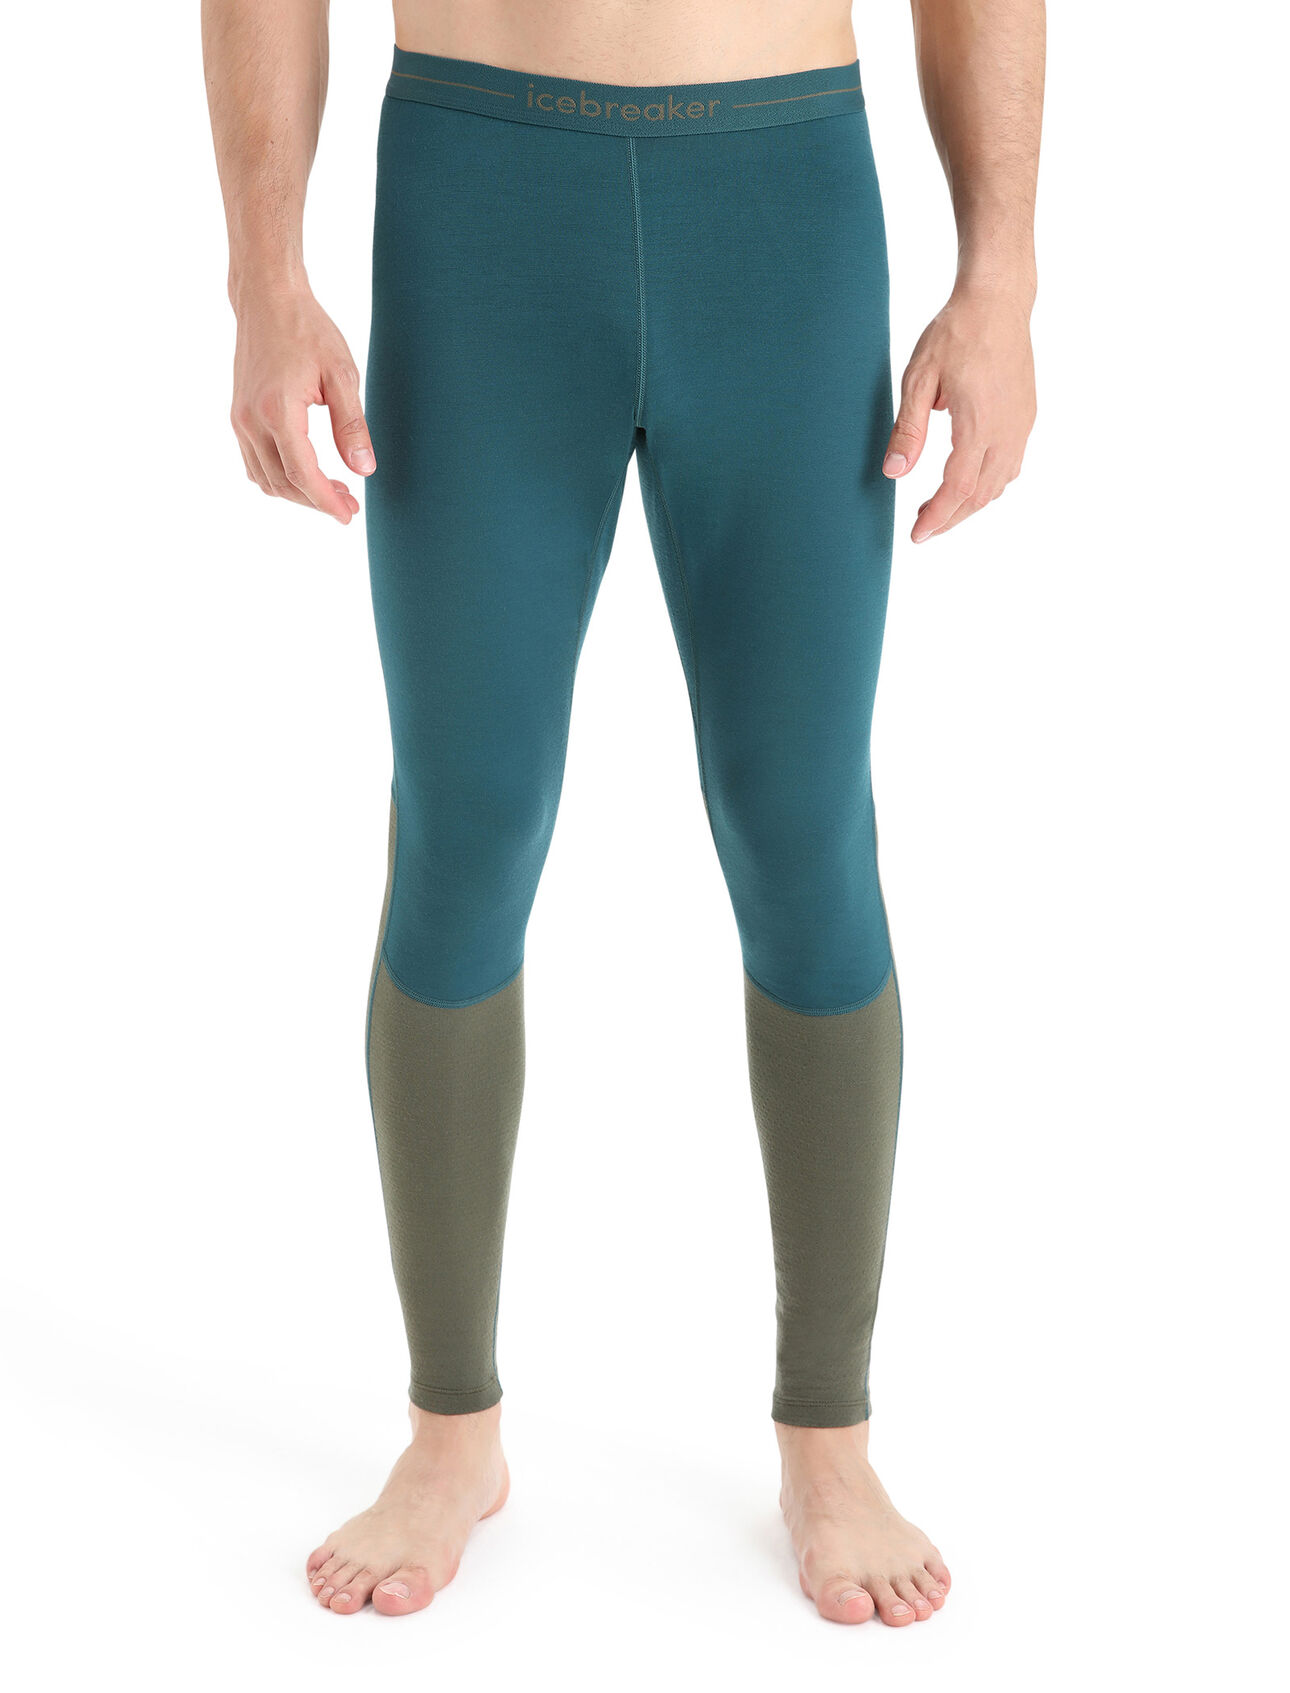 Mens 200 ZoneKnit™ Merino Thermal Leggings Midweight merino base layer bottoms designed to help regulate temperature during high-intensity activity, the 200 ZoneKnit™ Leggings feature 100% pure and natural merino wool.